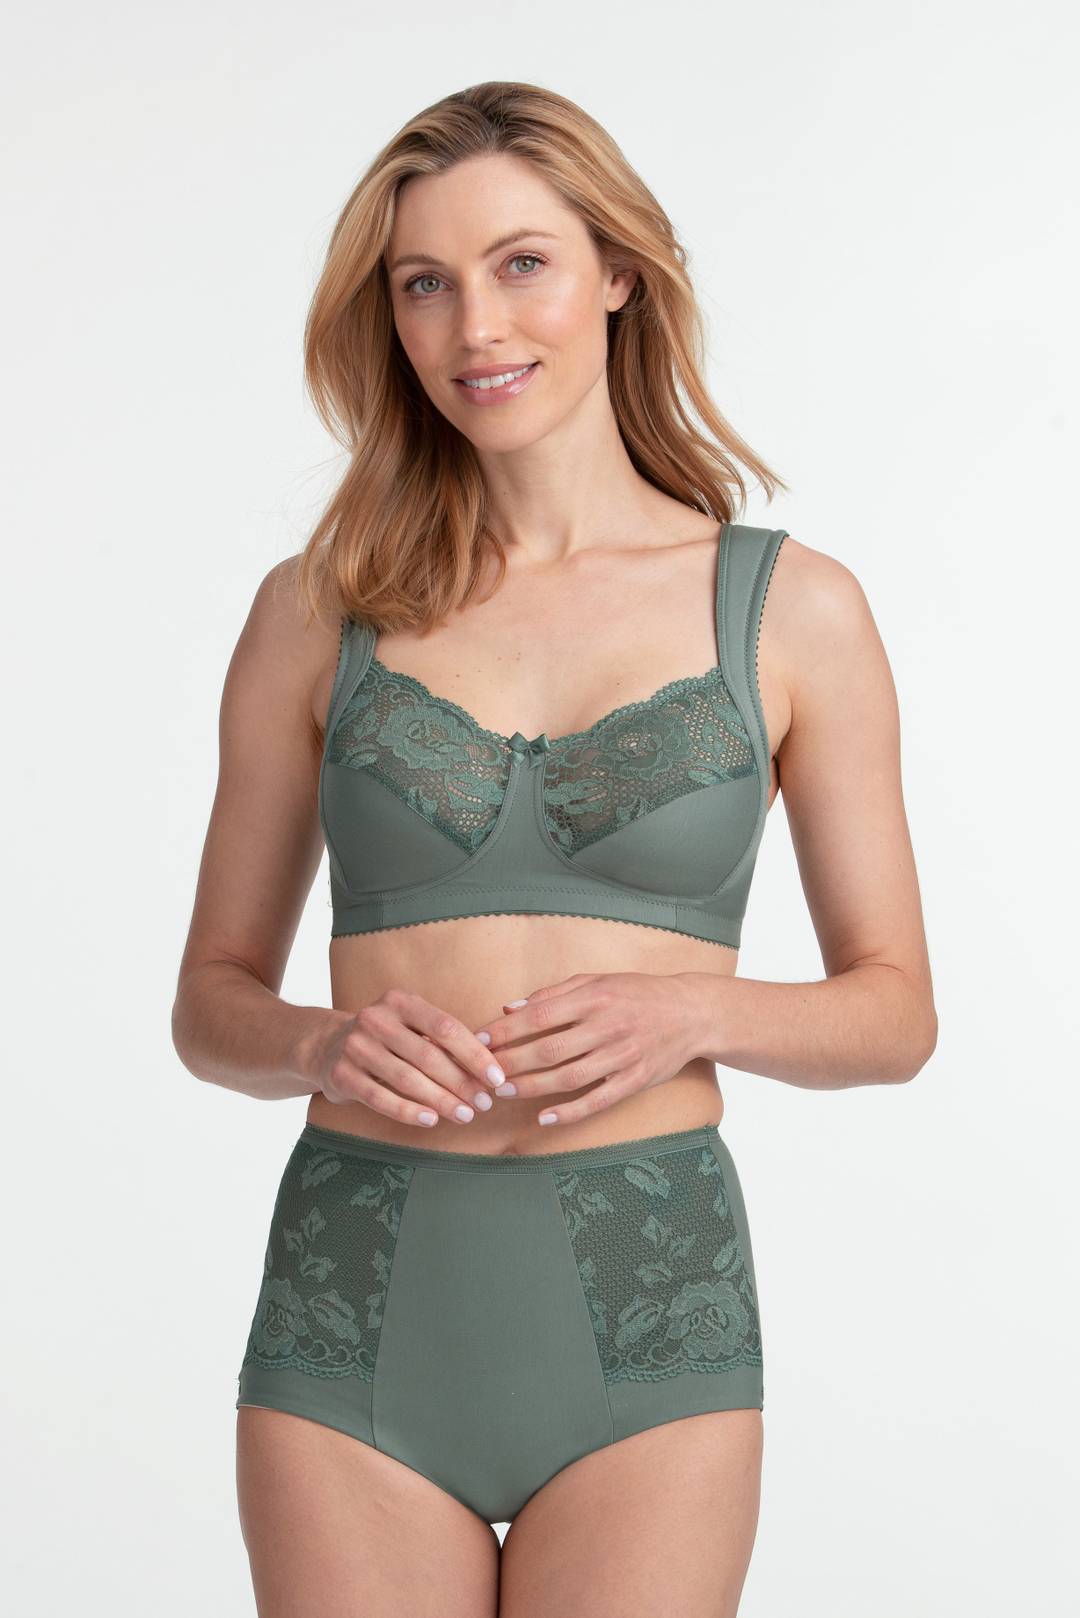 Lovely Lace – the bra you'll forget you're wearing – Miss Mary